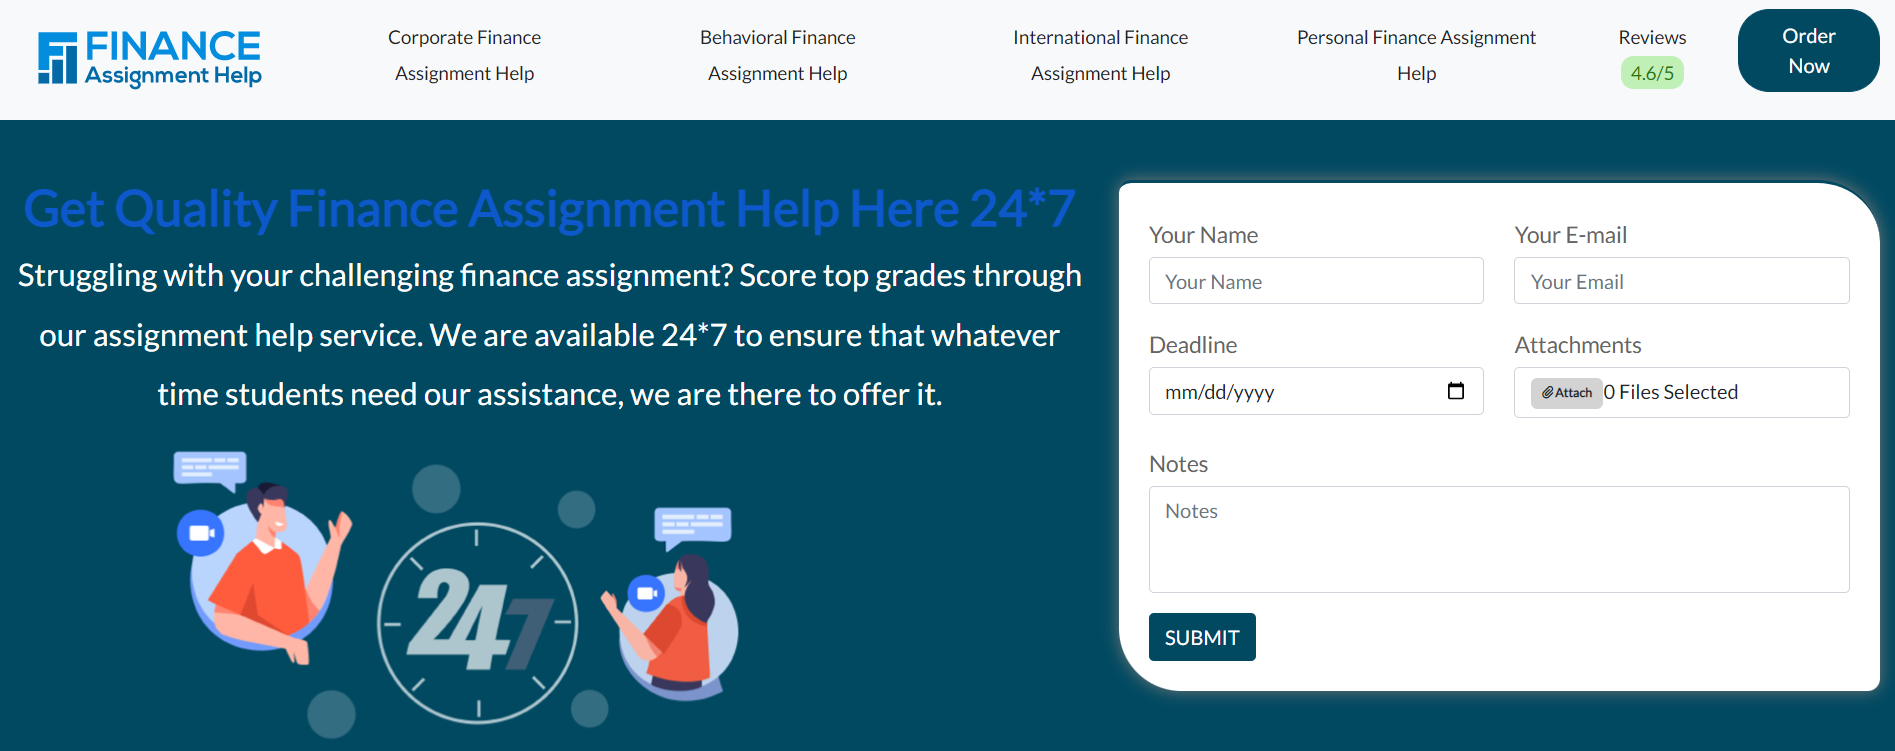 Finance Assignment Help cover